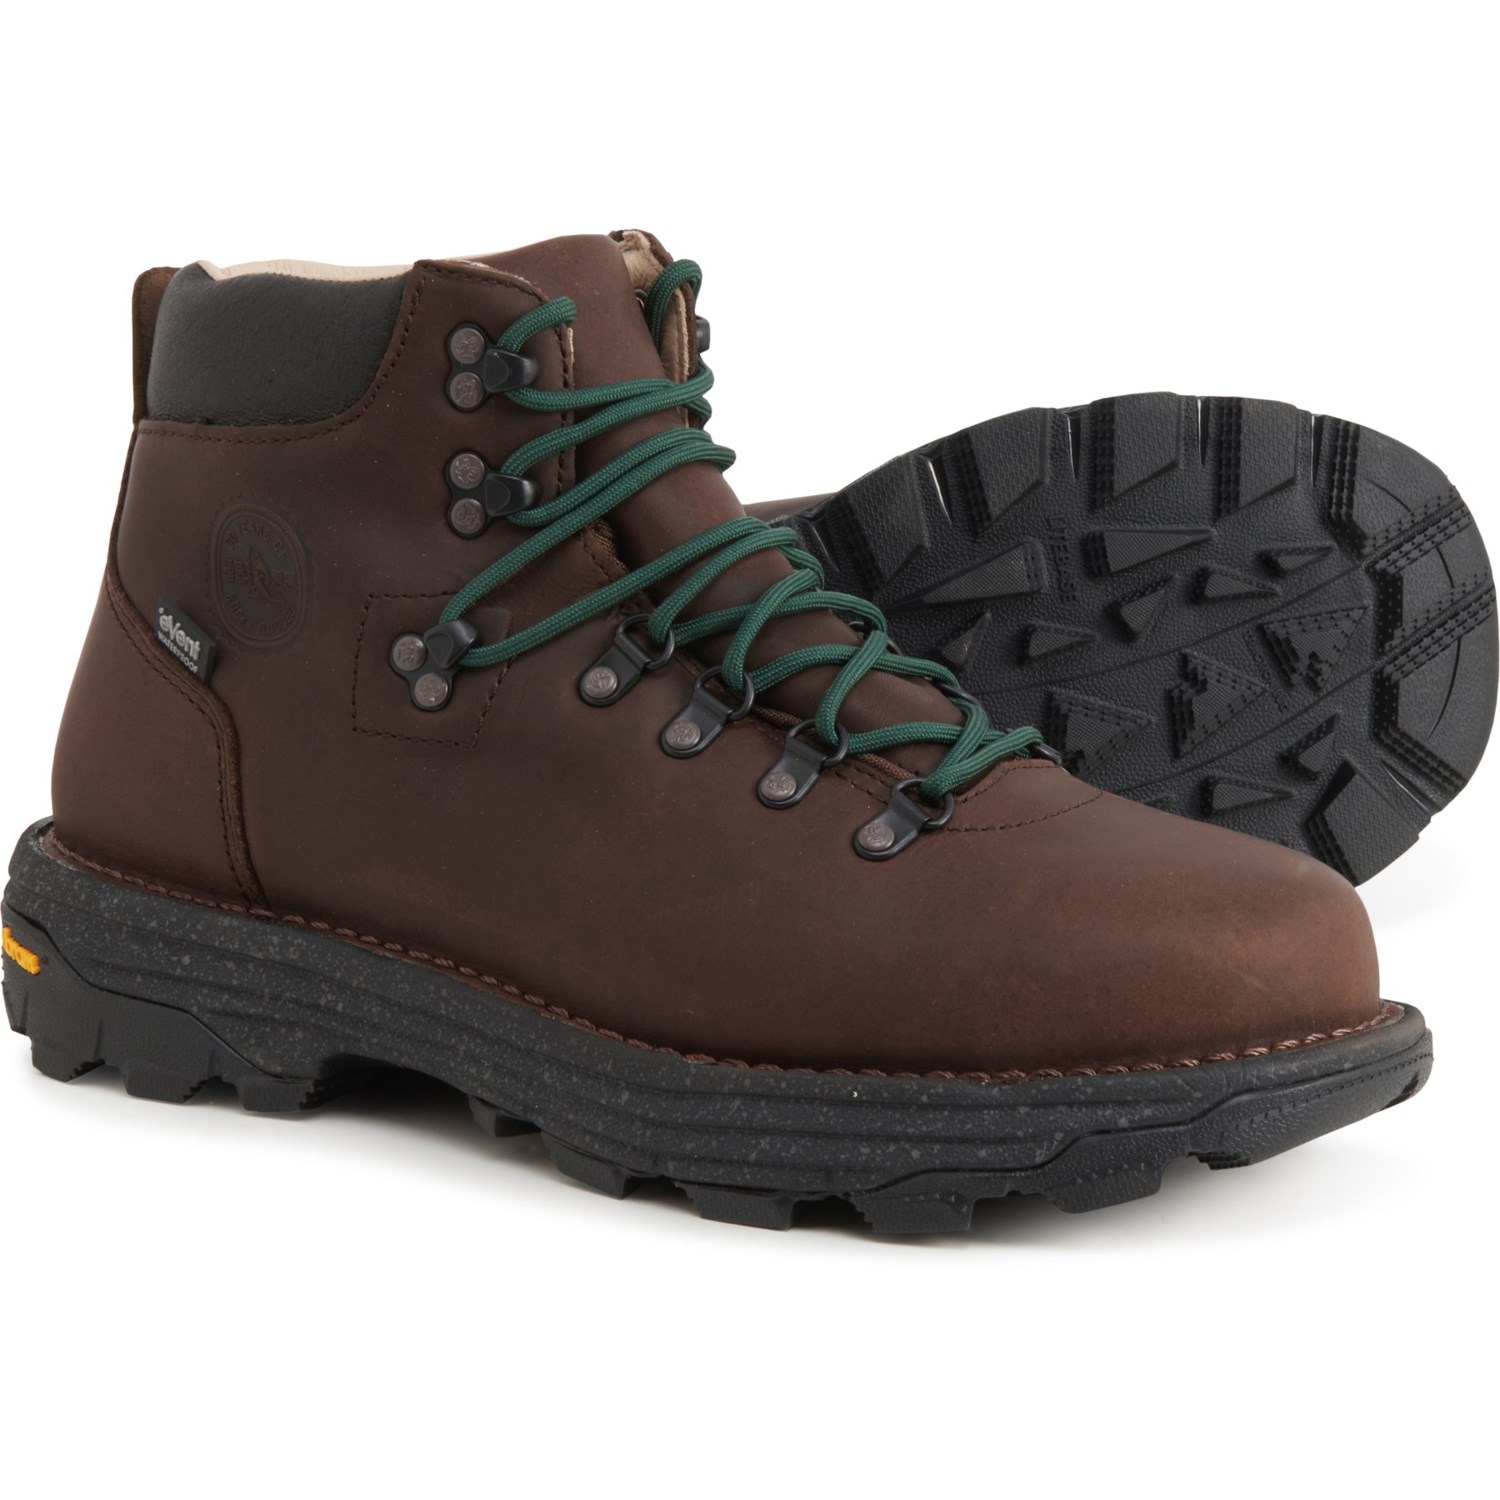 Rocky Rampage Hiking Boots - Waterproof, Leather (For Men)